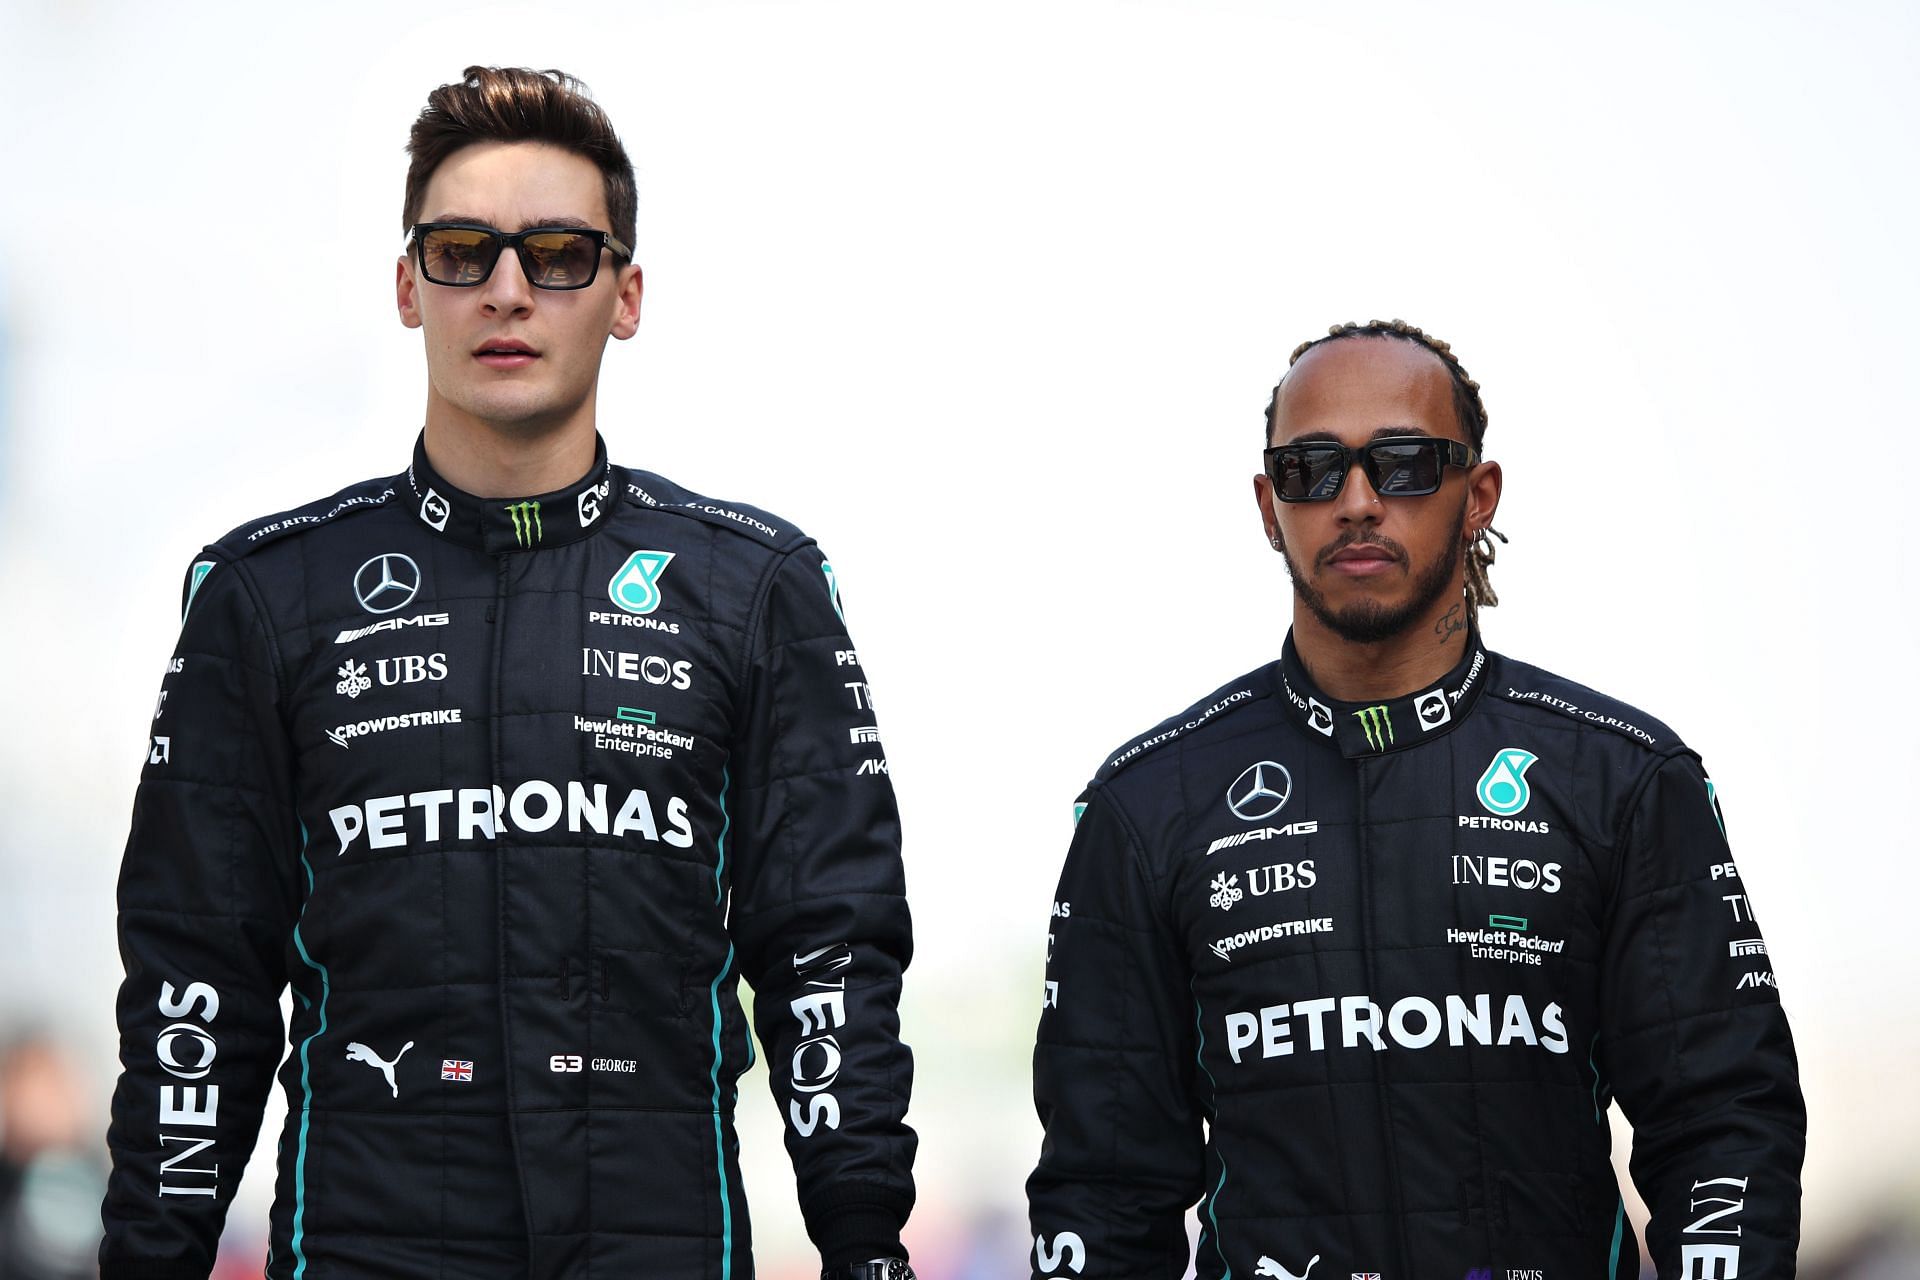 George Russell (left) and Lewis Hamilton at the Formula 1 Testing in Bahrain - Day 1